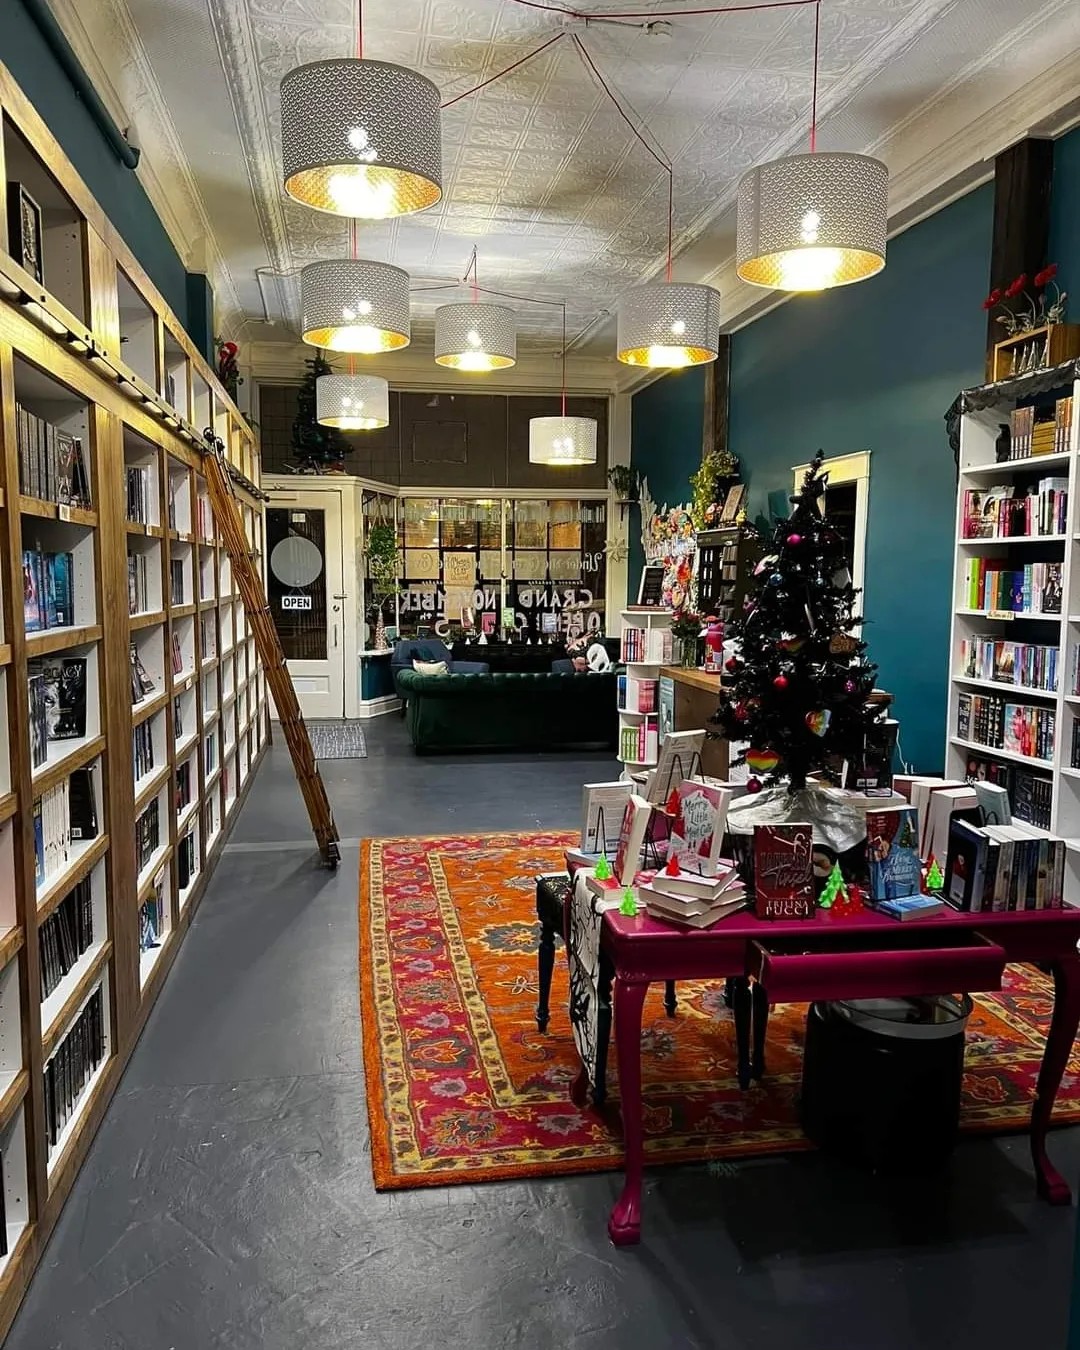 Kansas City's first worker-owned bookstore celebrates soft opening - KCtoday